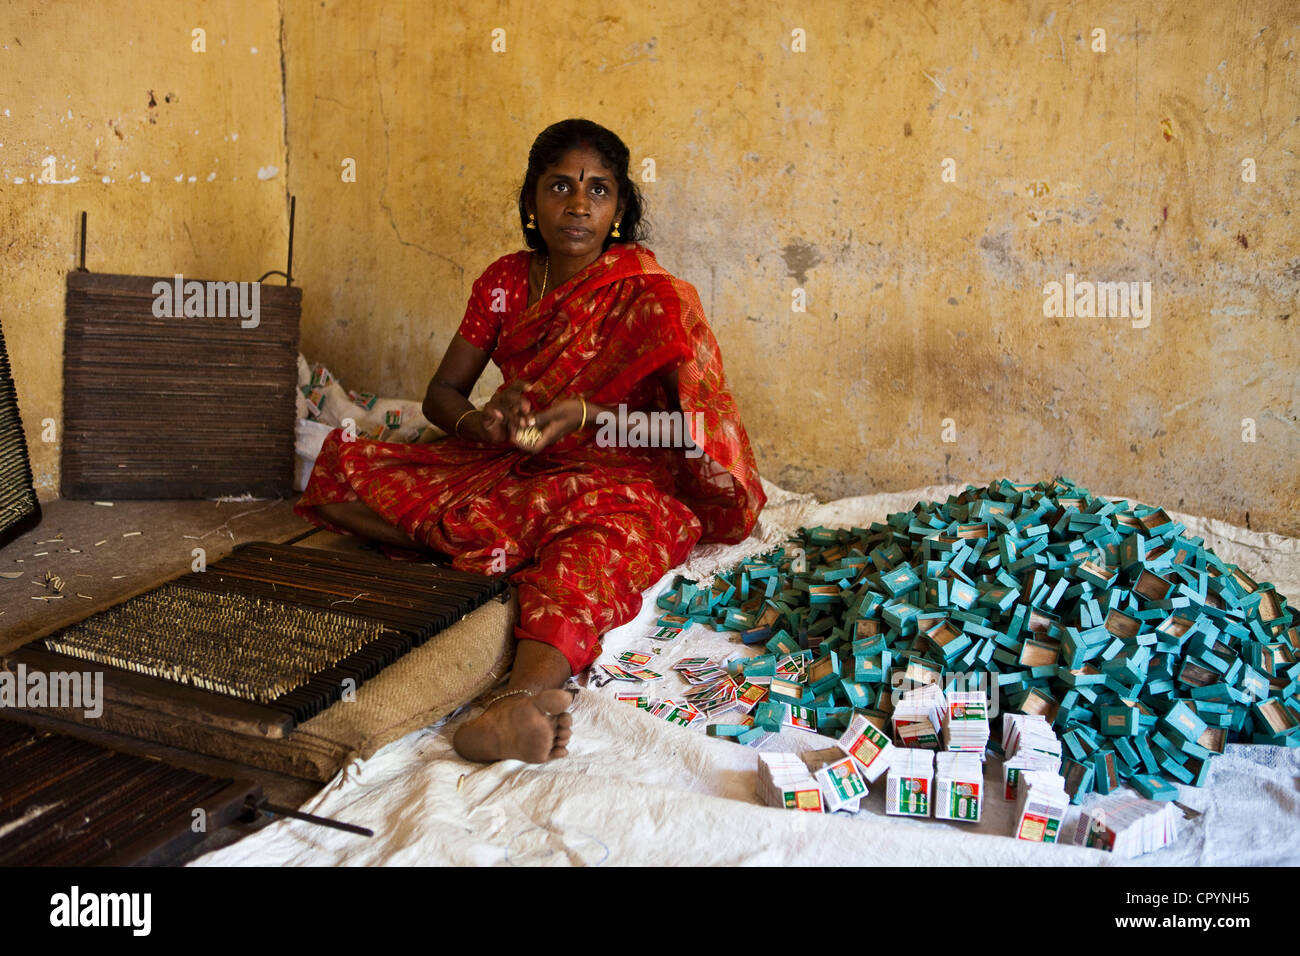 India, Kerala State, Kollam, a matches factory, a woman tidies up the matches in their box Stock Photo